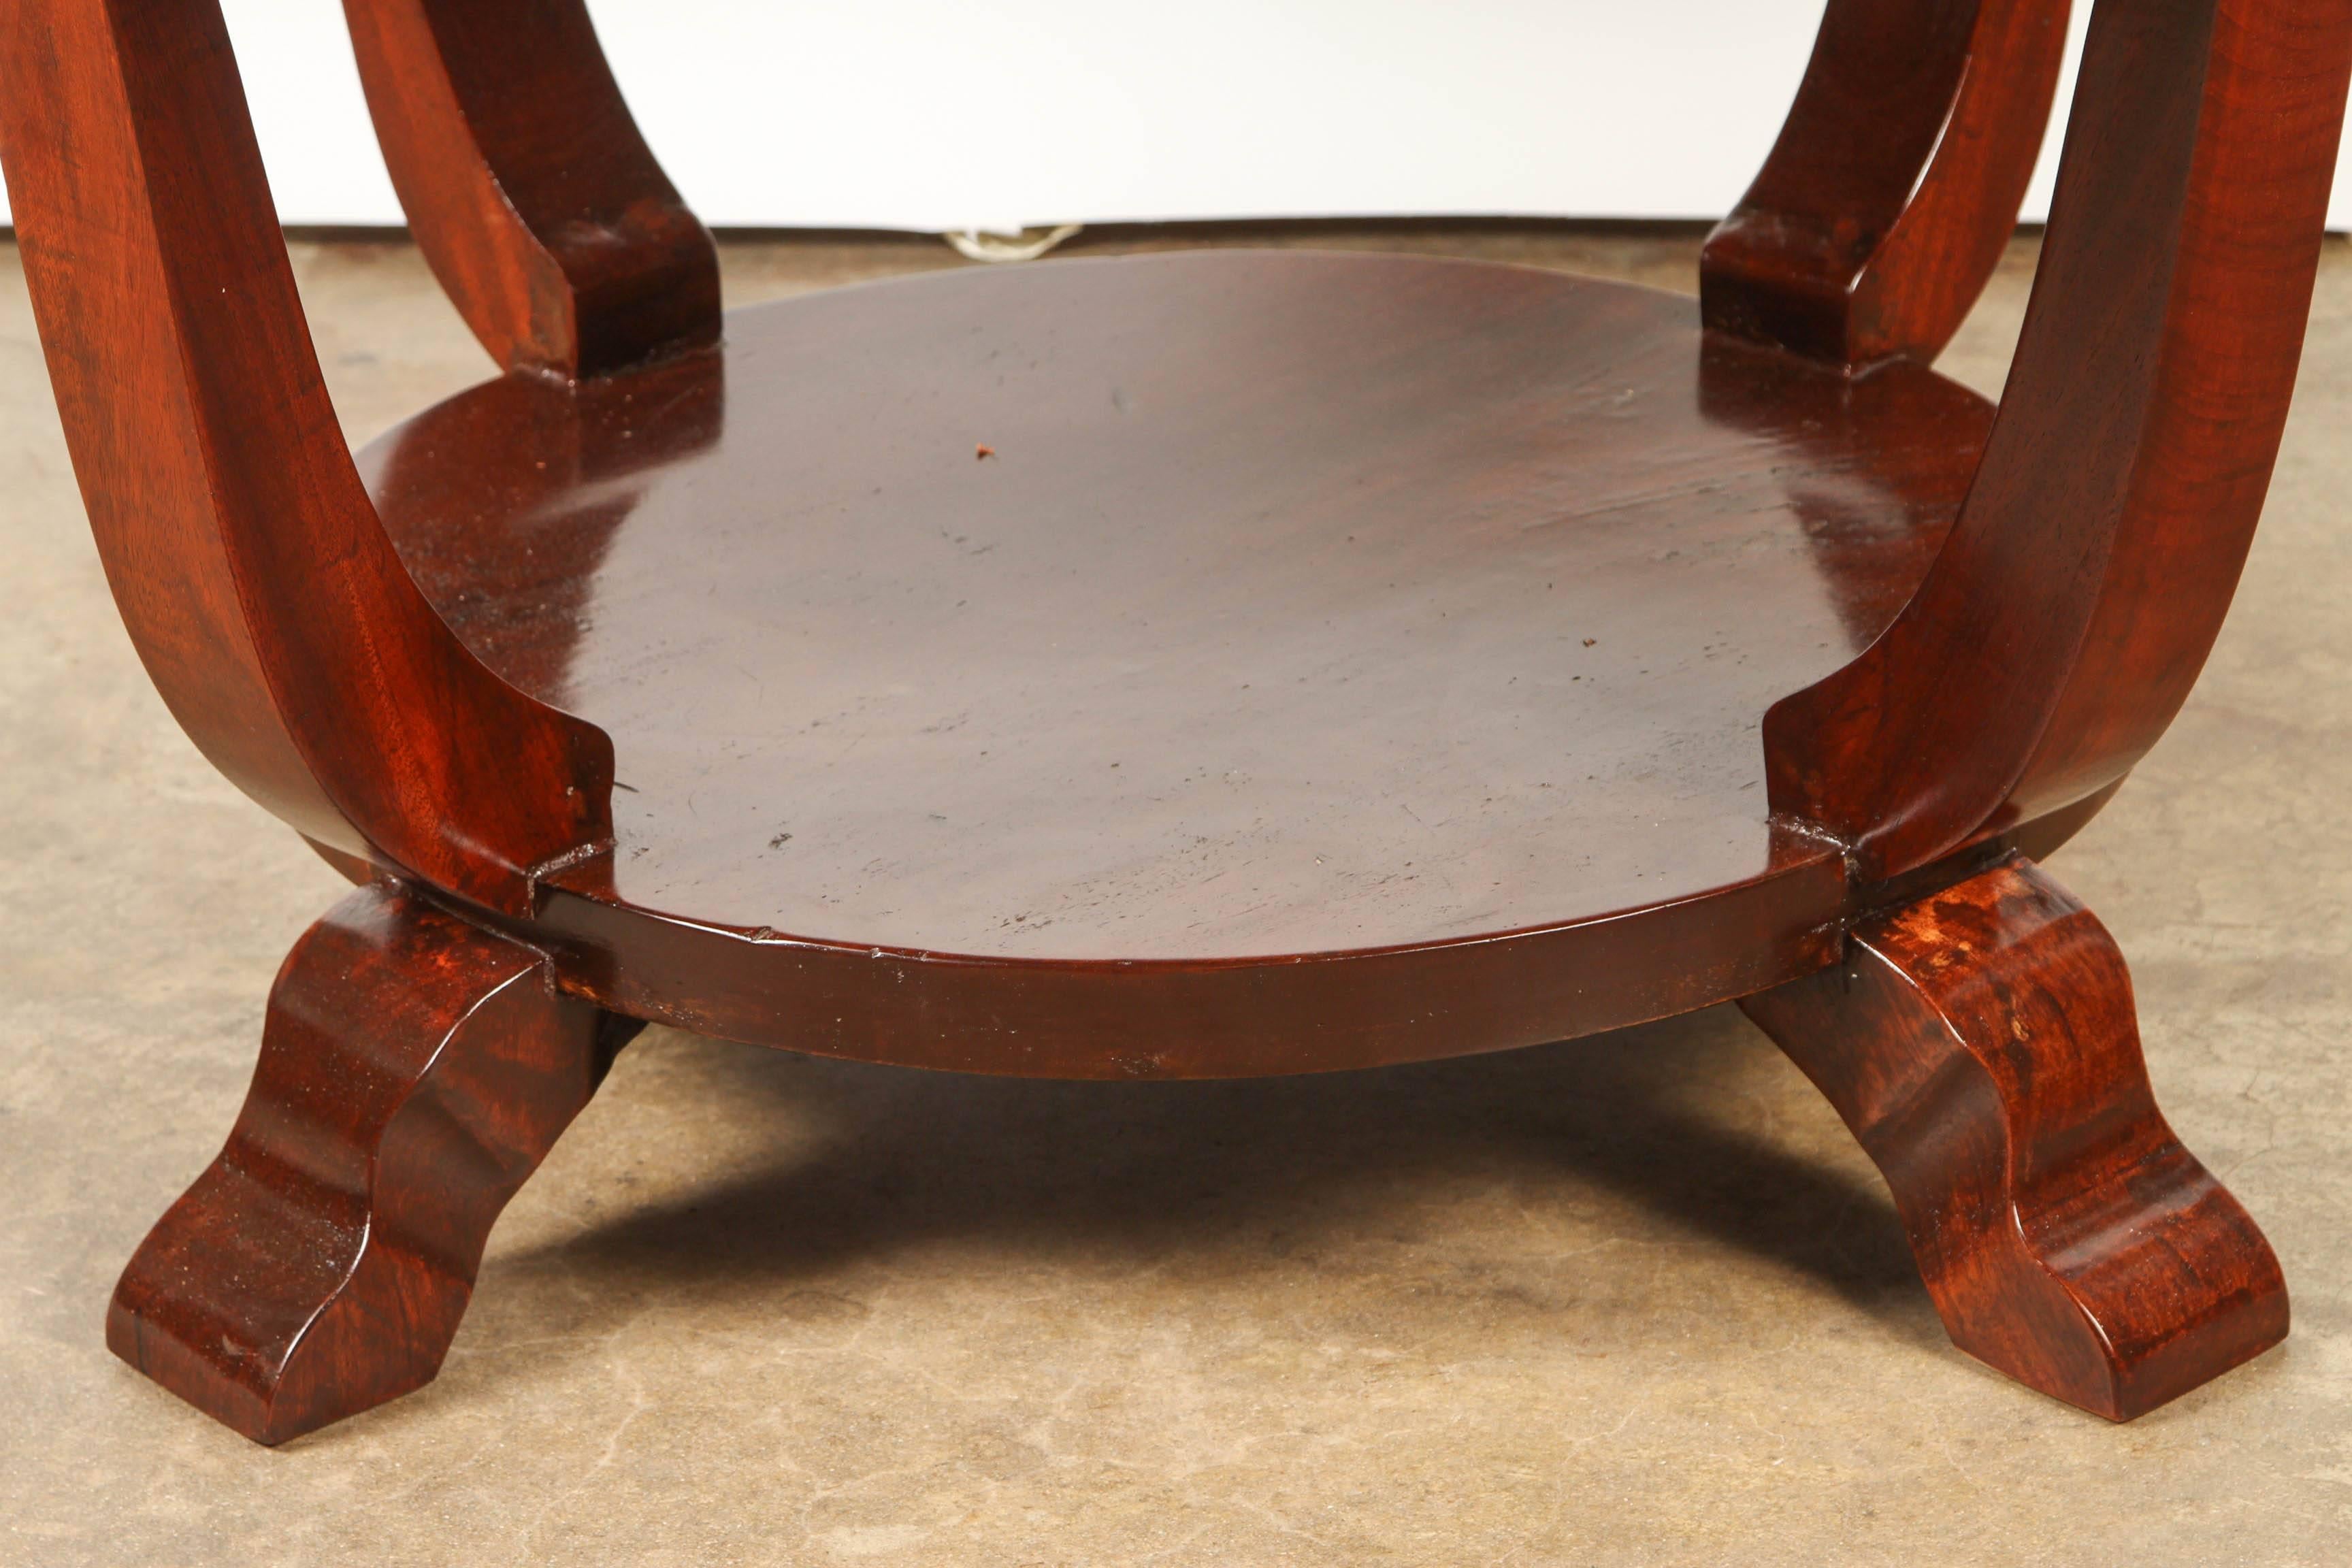 Made for the local French market, this Vietnamese solid rosewood table has a charming and slightly primitive take on the Art Deco Style. A circular top is supported by 4 gently curving legs, with a lower shelf supported by 4 feet.